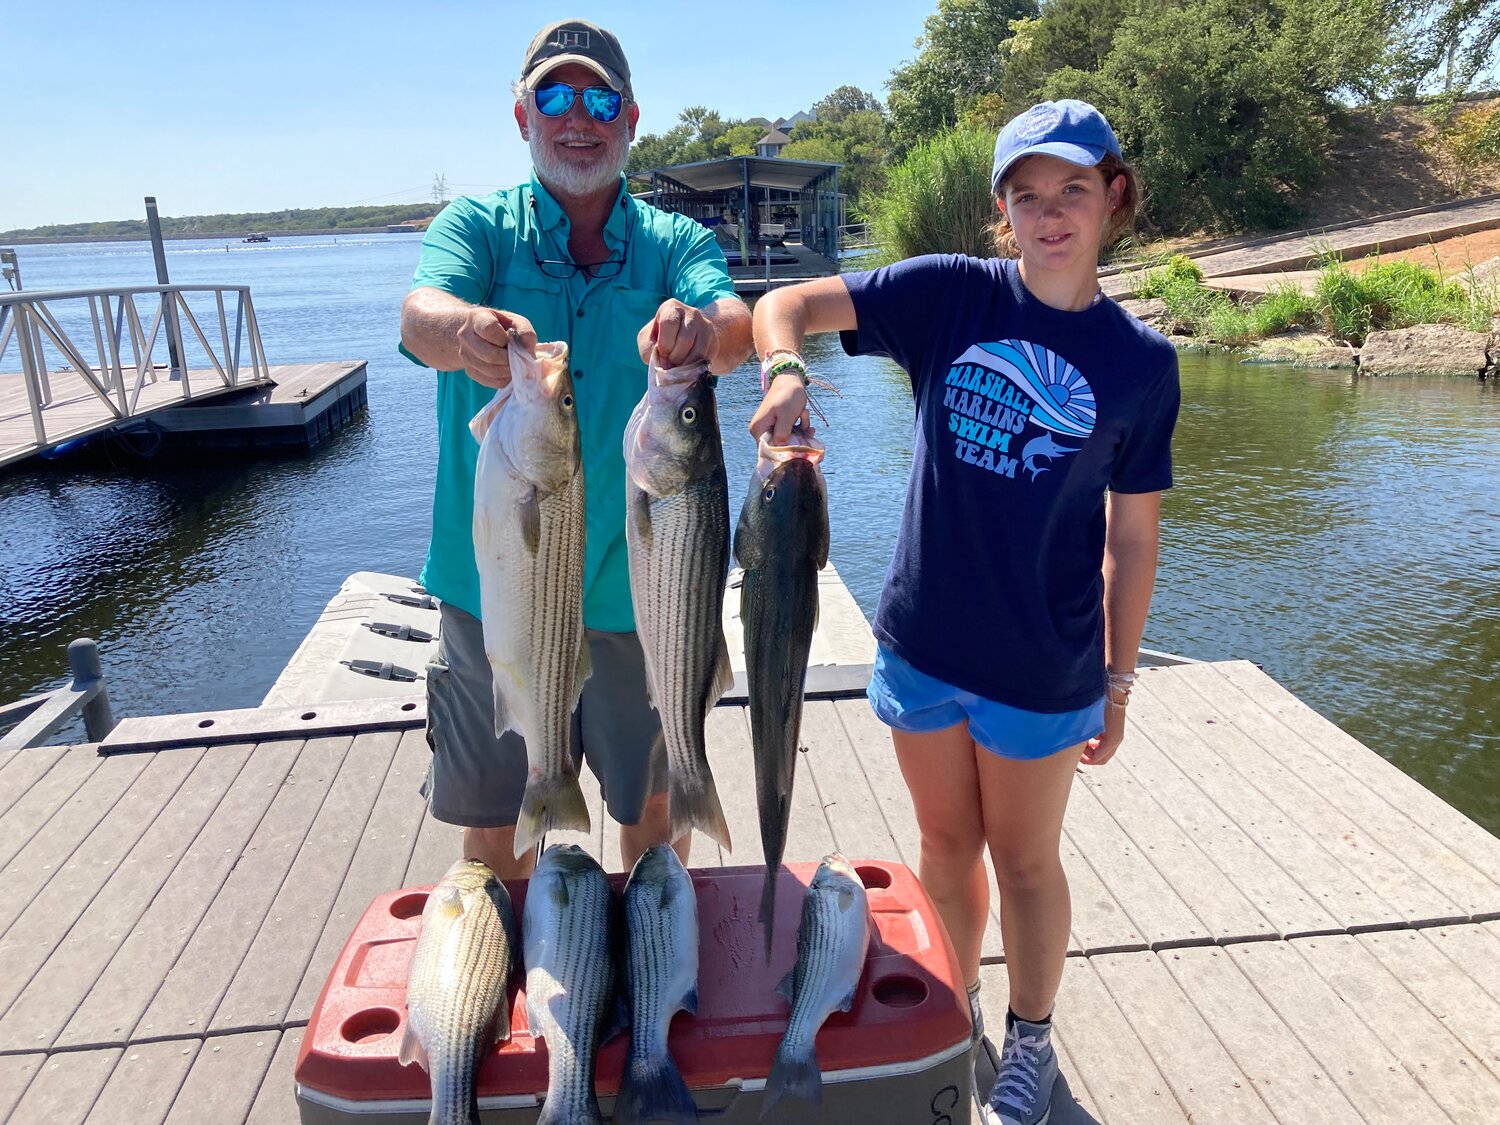 Pictured is Patrick Ryan and his daughter Bridget with their catch of big Granbury striped bass caught this last weekend.